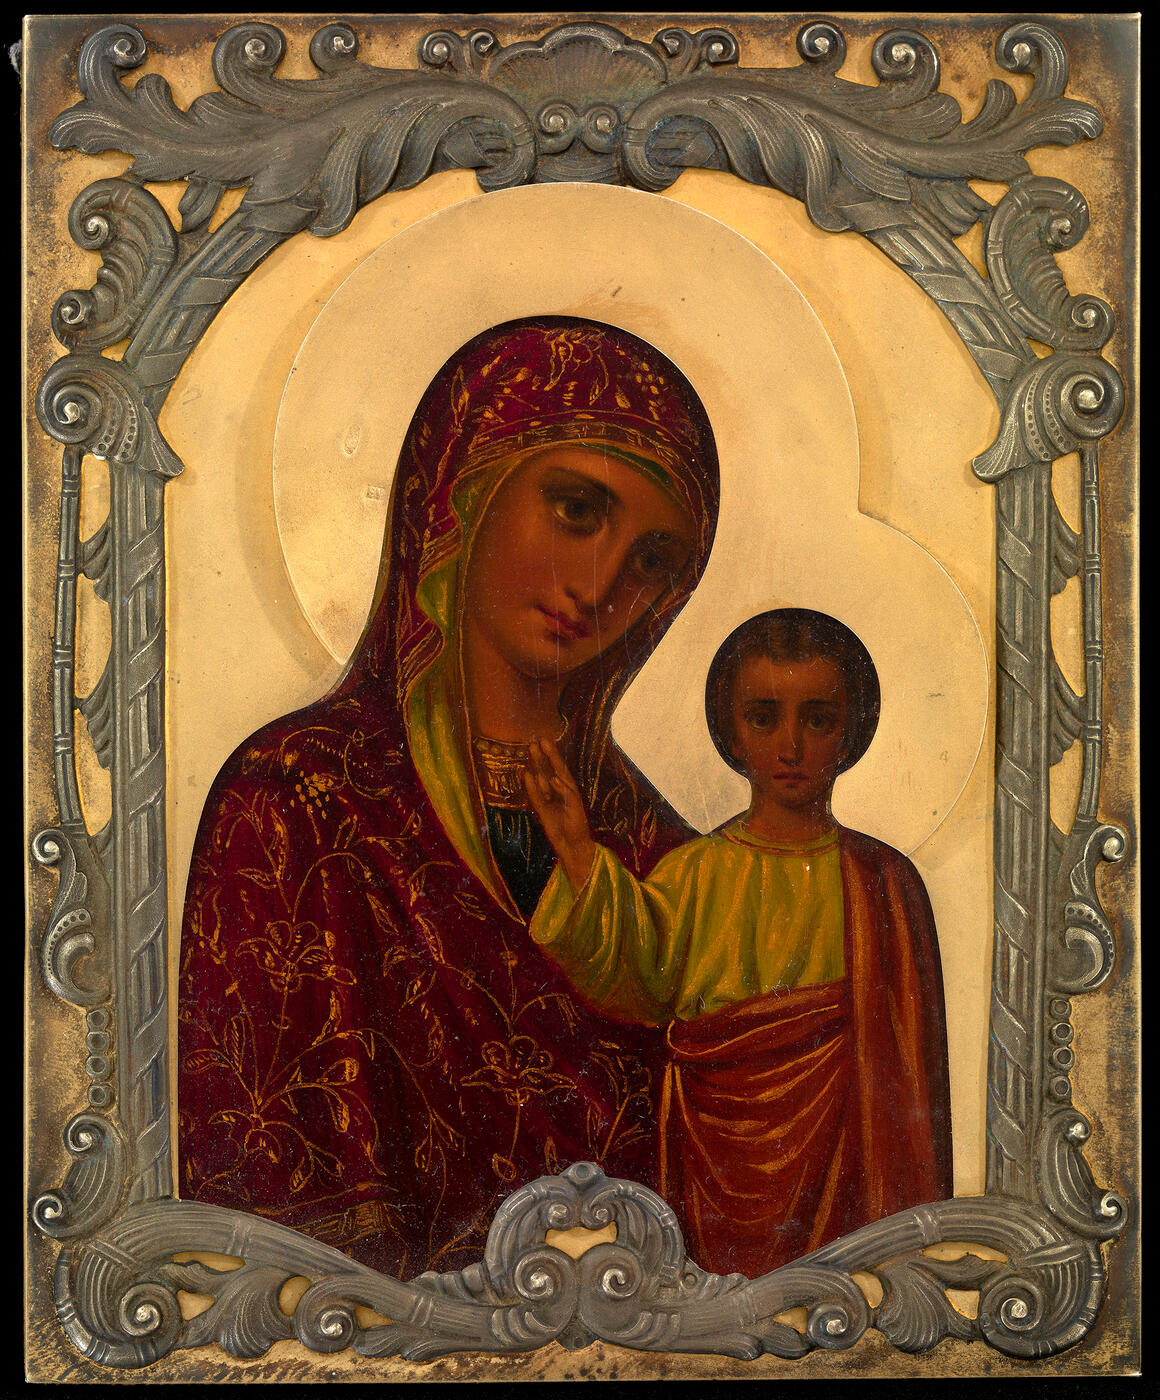 EARLY 20TH CENTURY, OIL ON PANEL, OKLADS STAMPED WITH MAKER’S
MARKS EU IN CYRILLIC, MOSCOW, 84 STANDARD